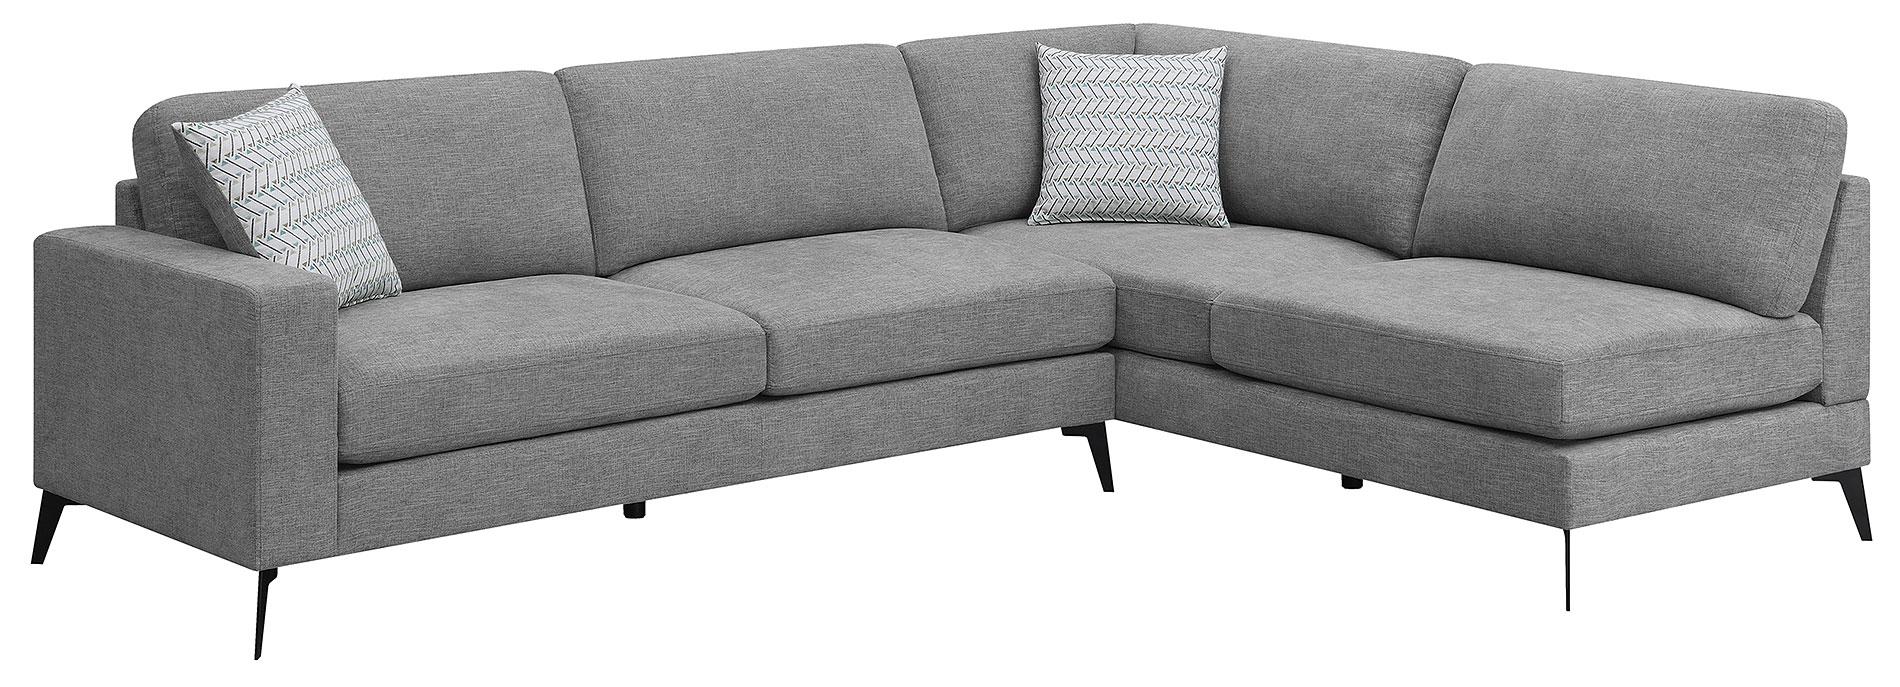 Modern Sectional 509806 Clint 509806 in Gray Chenille